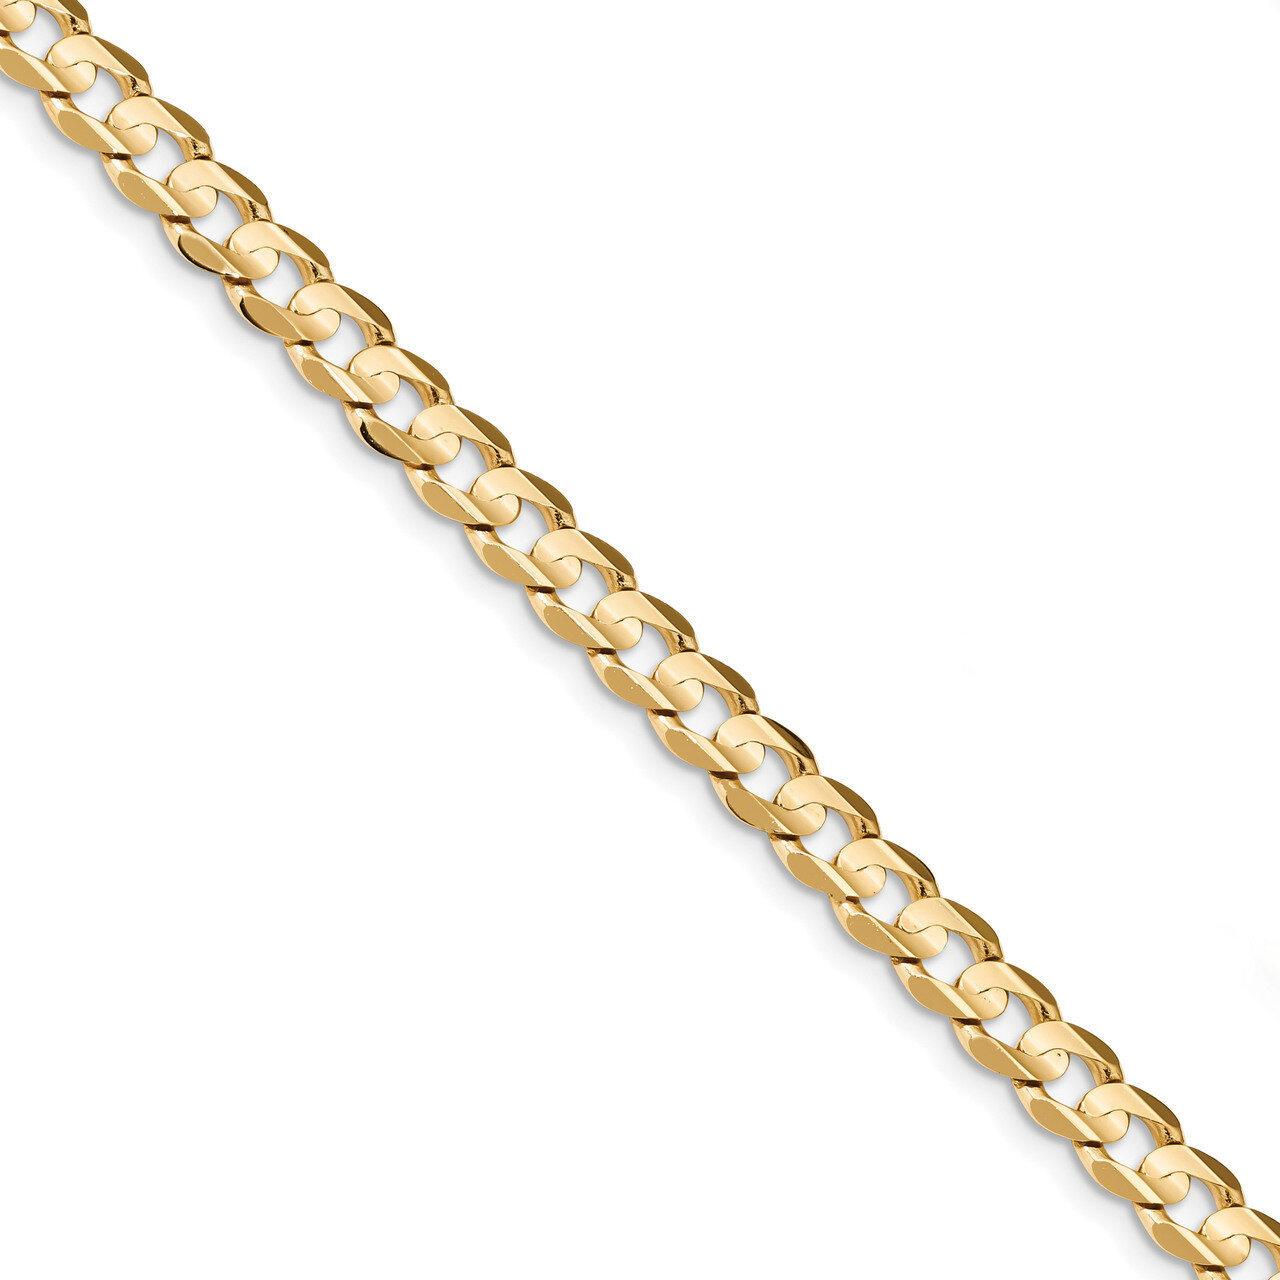 7 Inch 7.5mm Open Concave Curb Chain 14k Gold LCR200-7